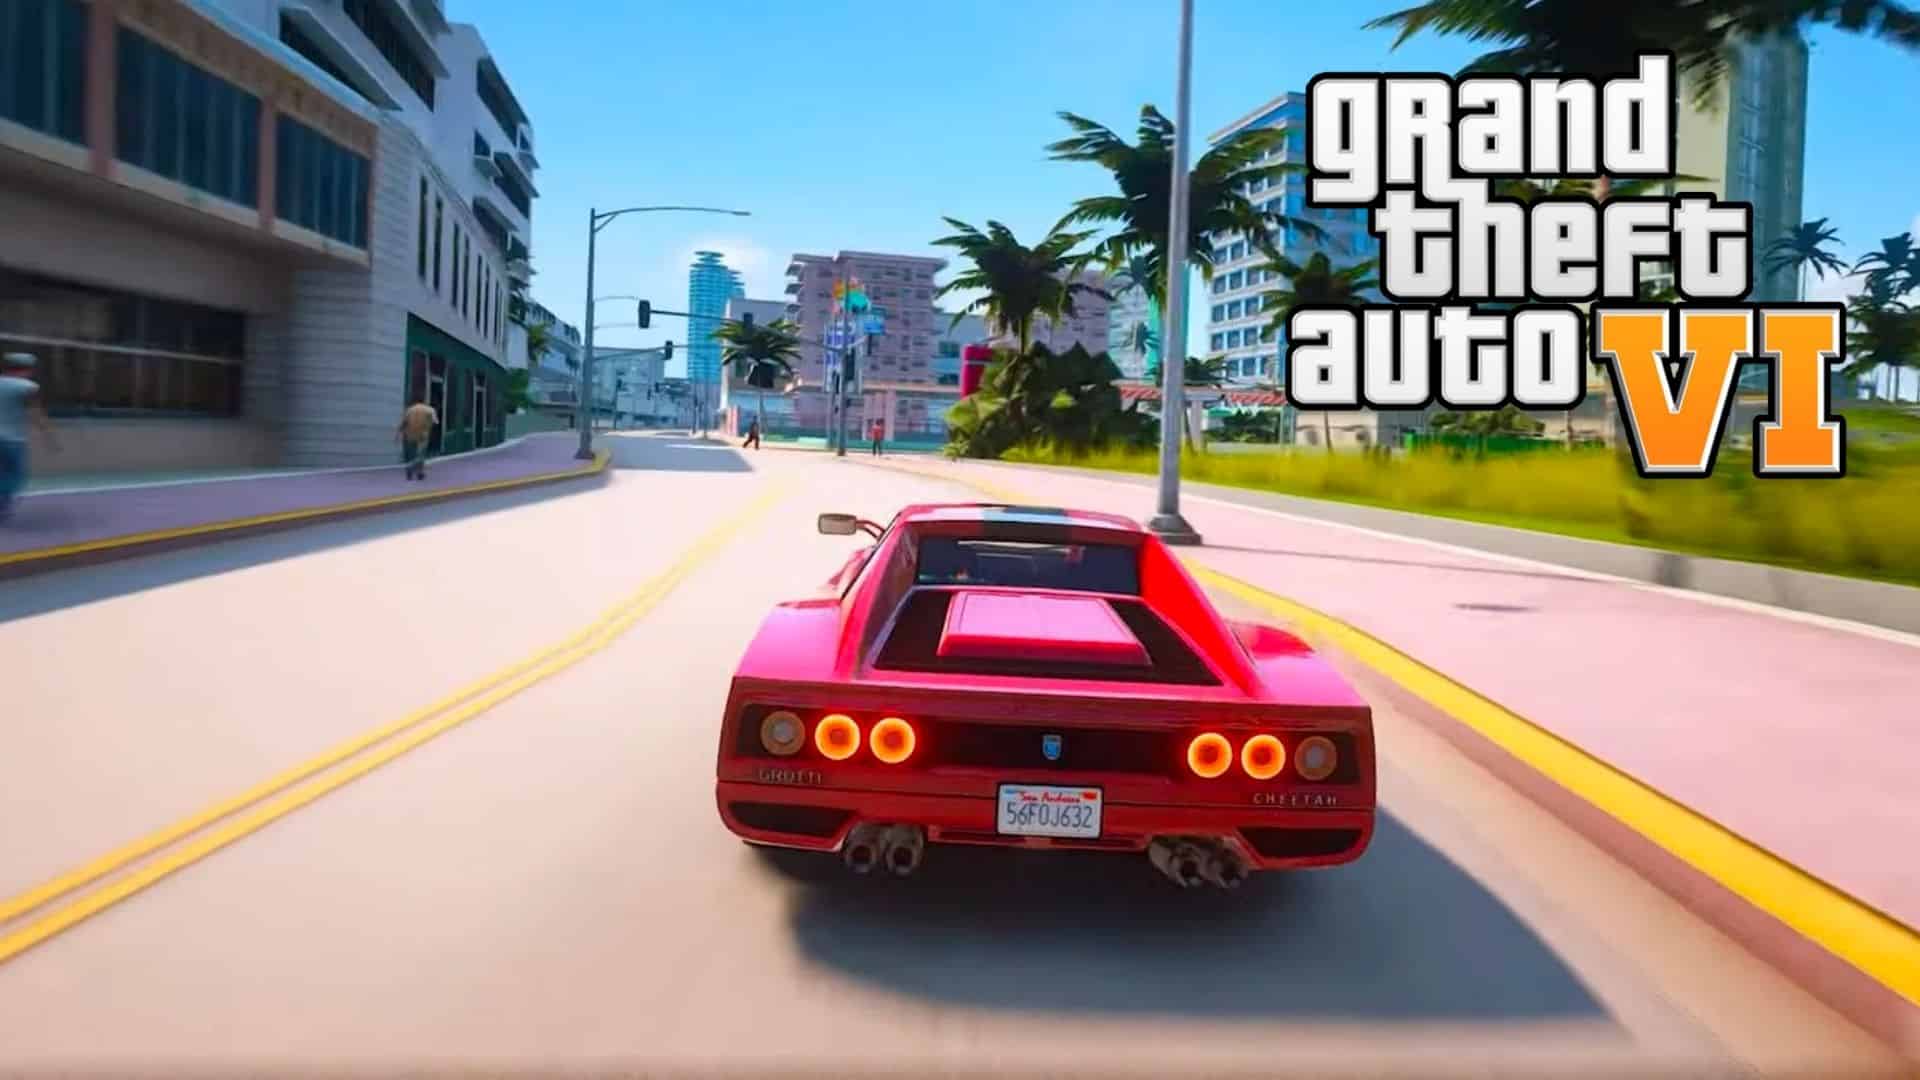 Rockstar dev says GTA 6 will be “special” amid hype from fans